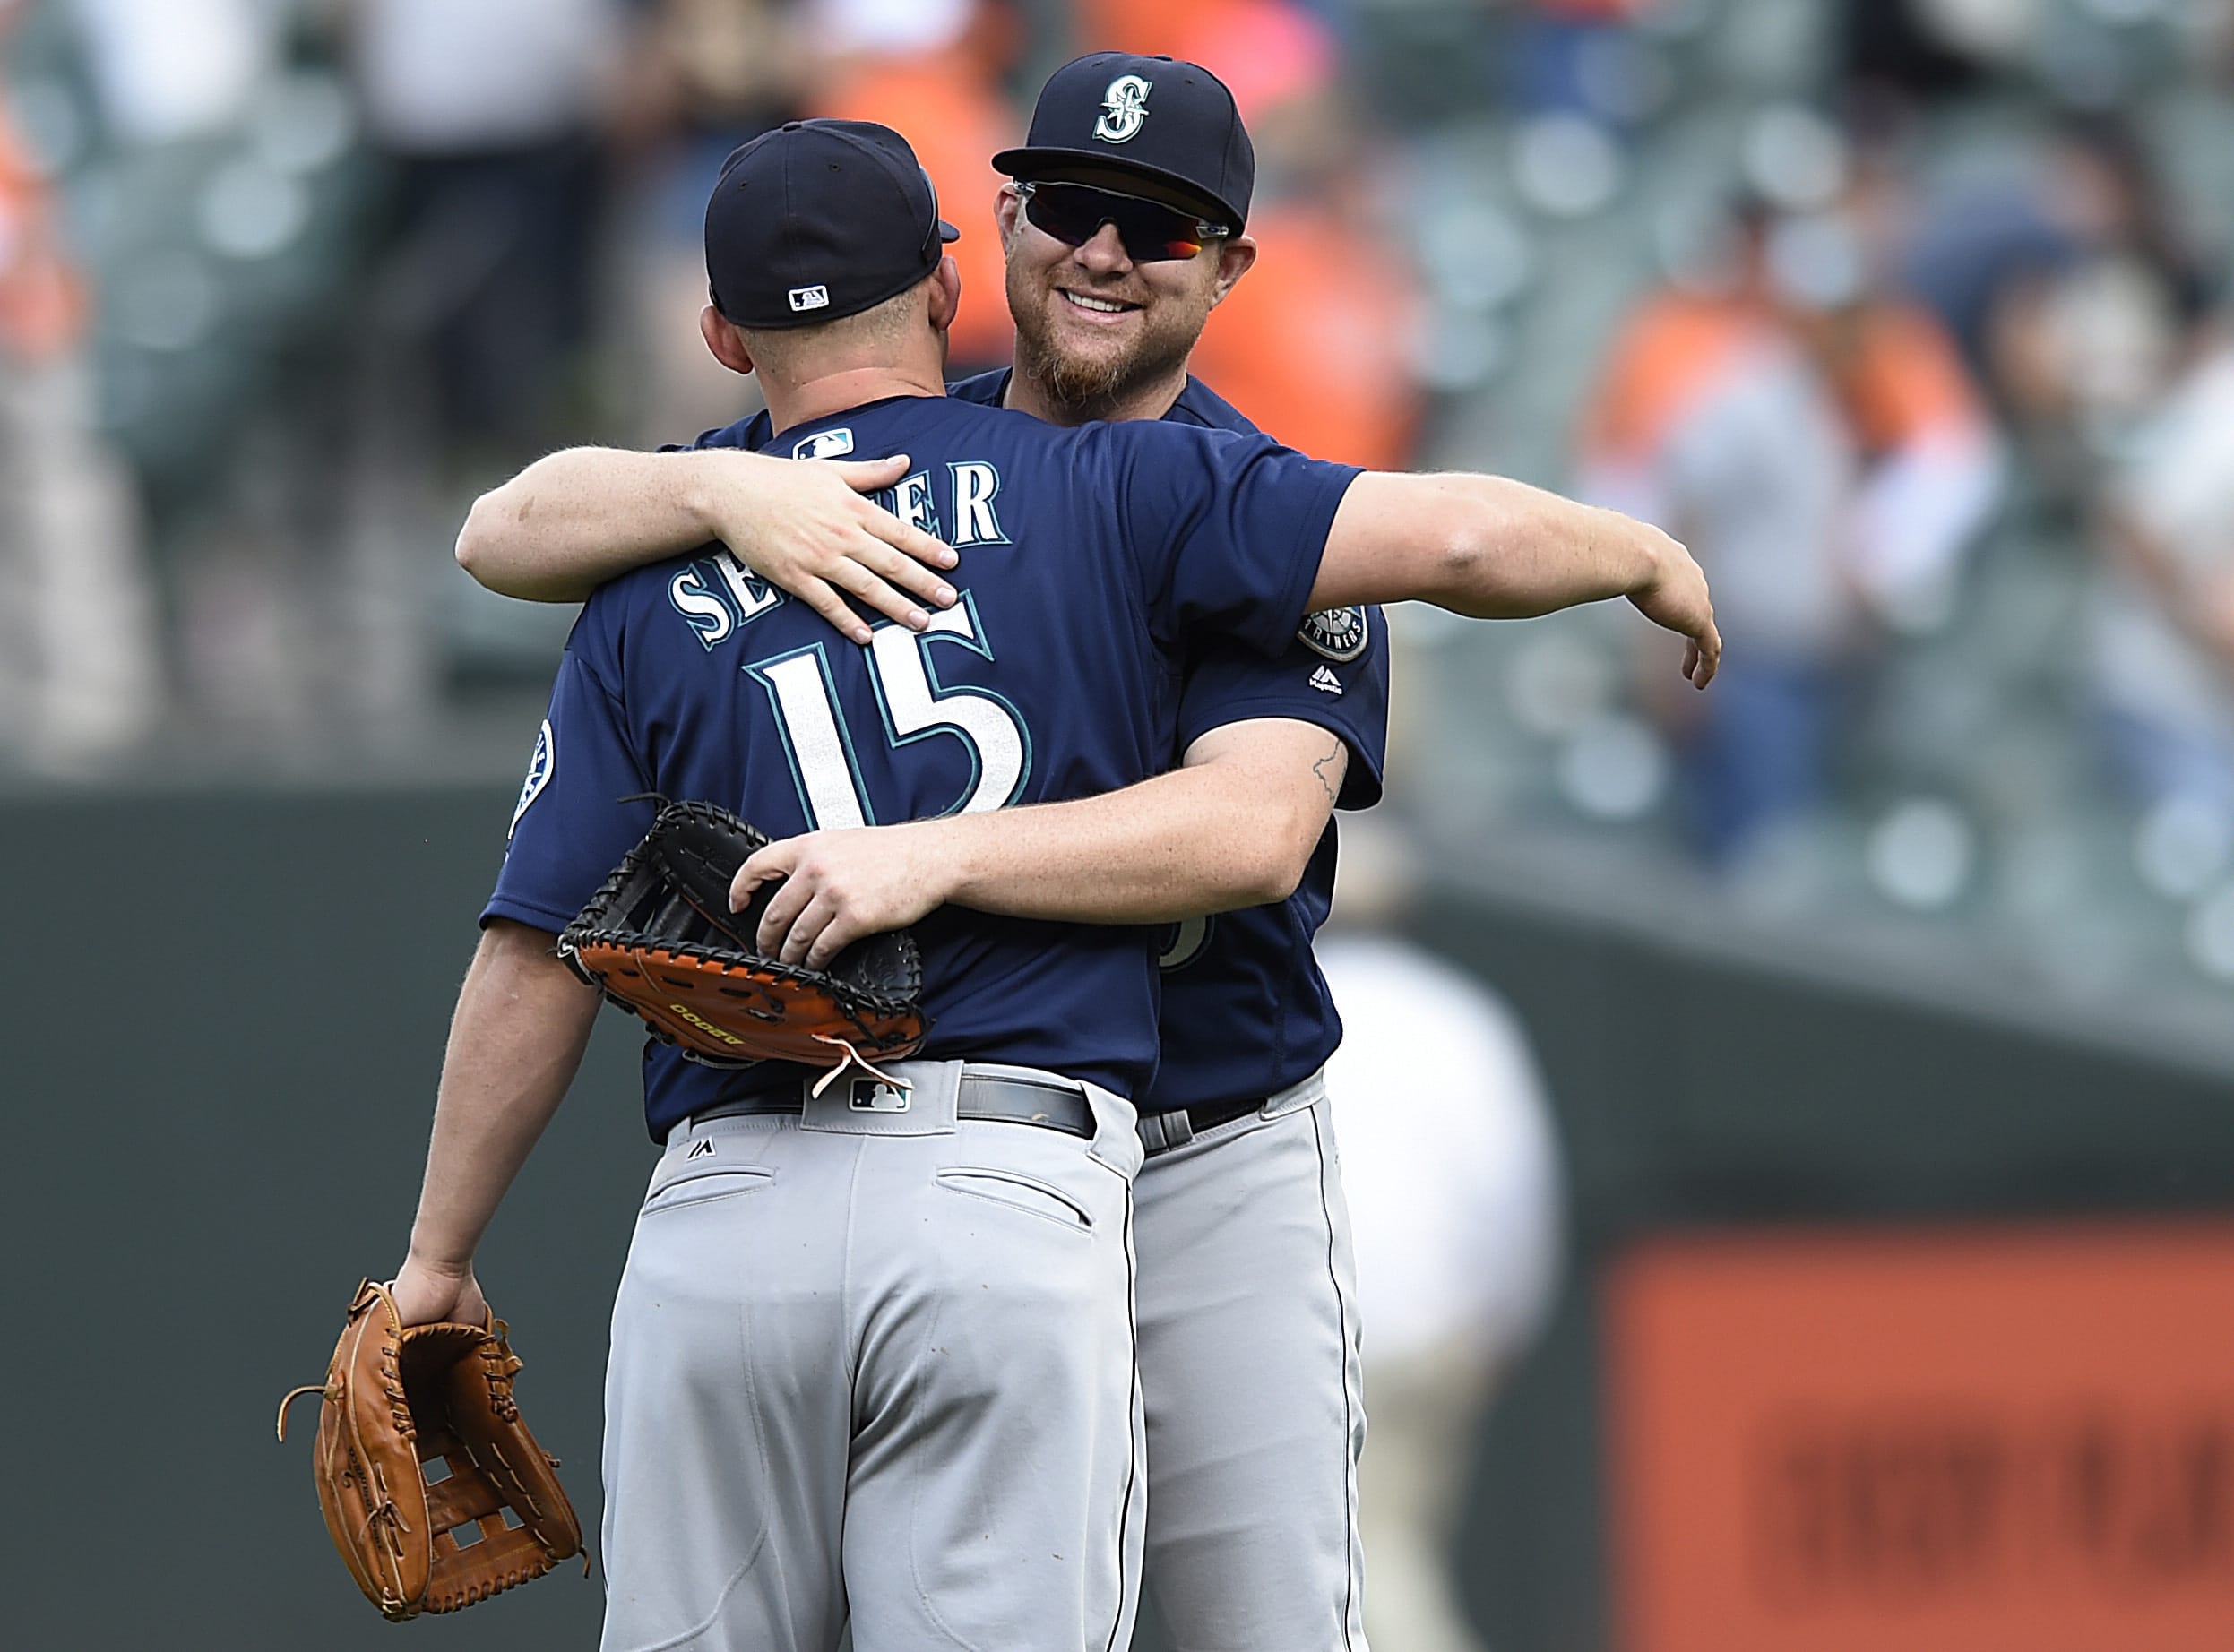 Seattle Mariners, Adam Lind, right, and Kyle Seager celebrate their 7-2 win over the Baltimore Orioles in a baseball game, Thursday, May 19, 2016, in Baltimore.